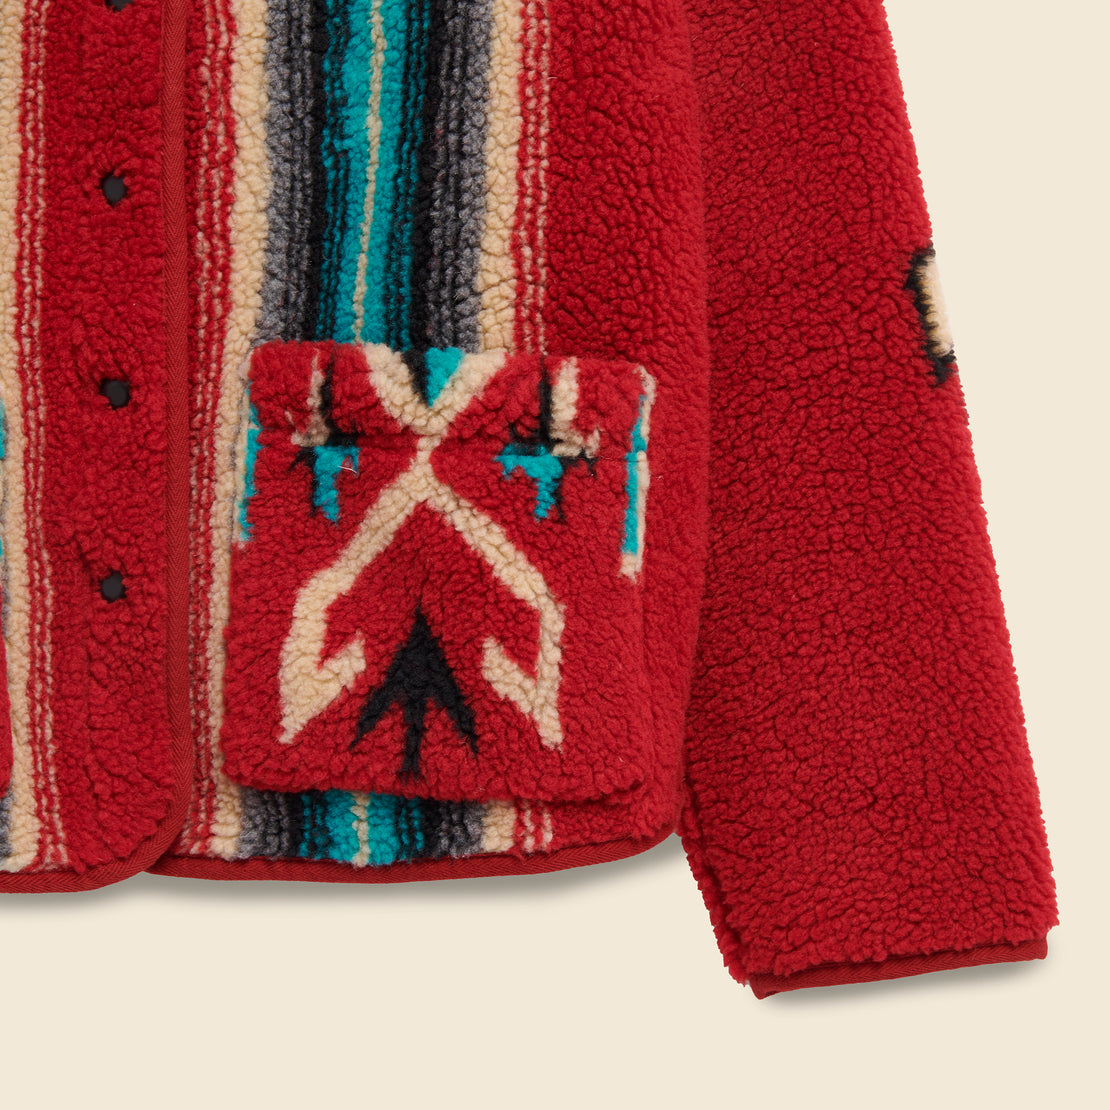 Chimayo Jacquard Sherpa Liner - Rescue Red Multi - RRL - STAG Provisions - W - Outerwear - Coat/Jacket